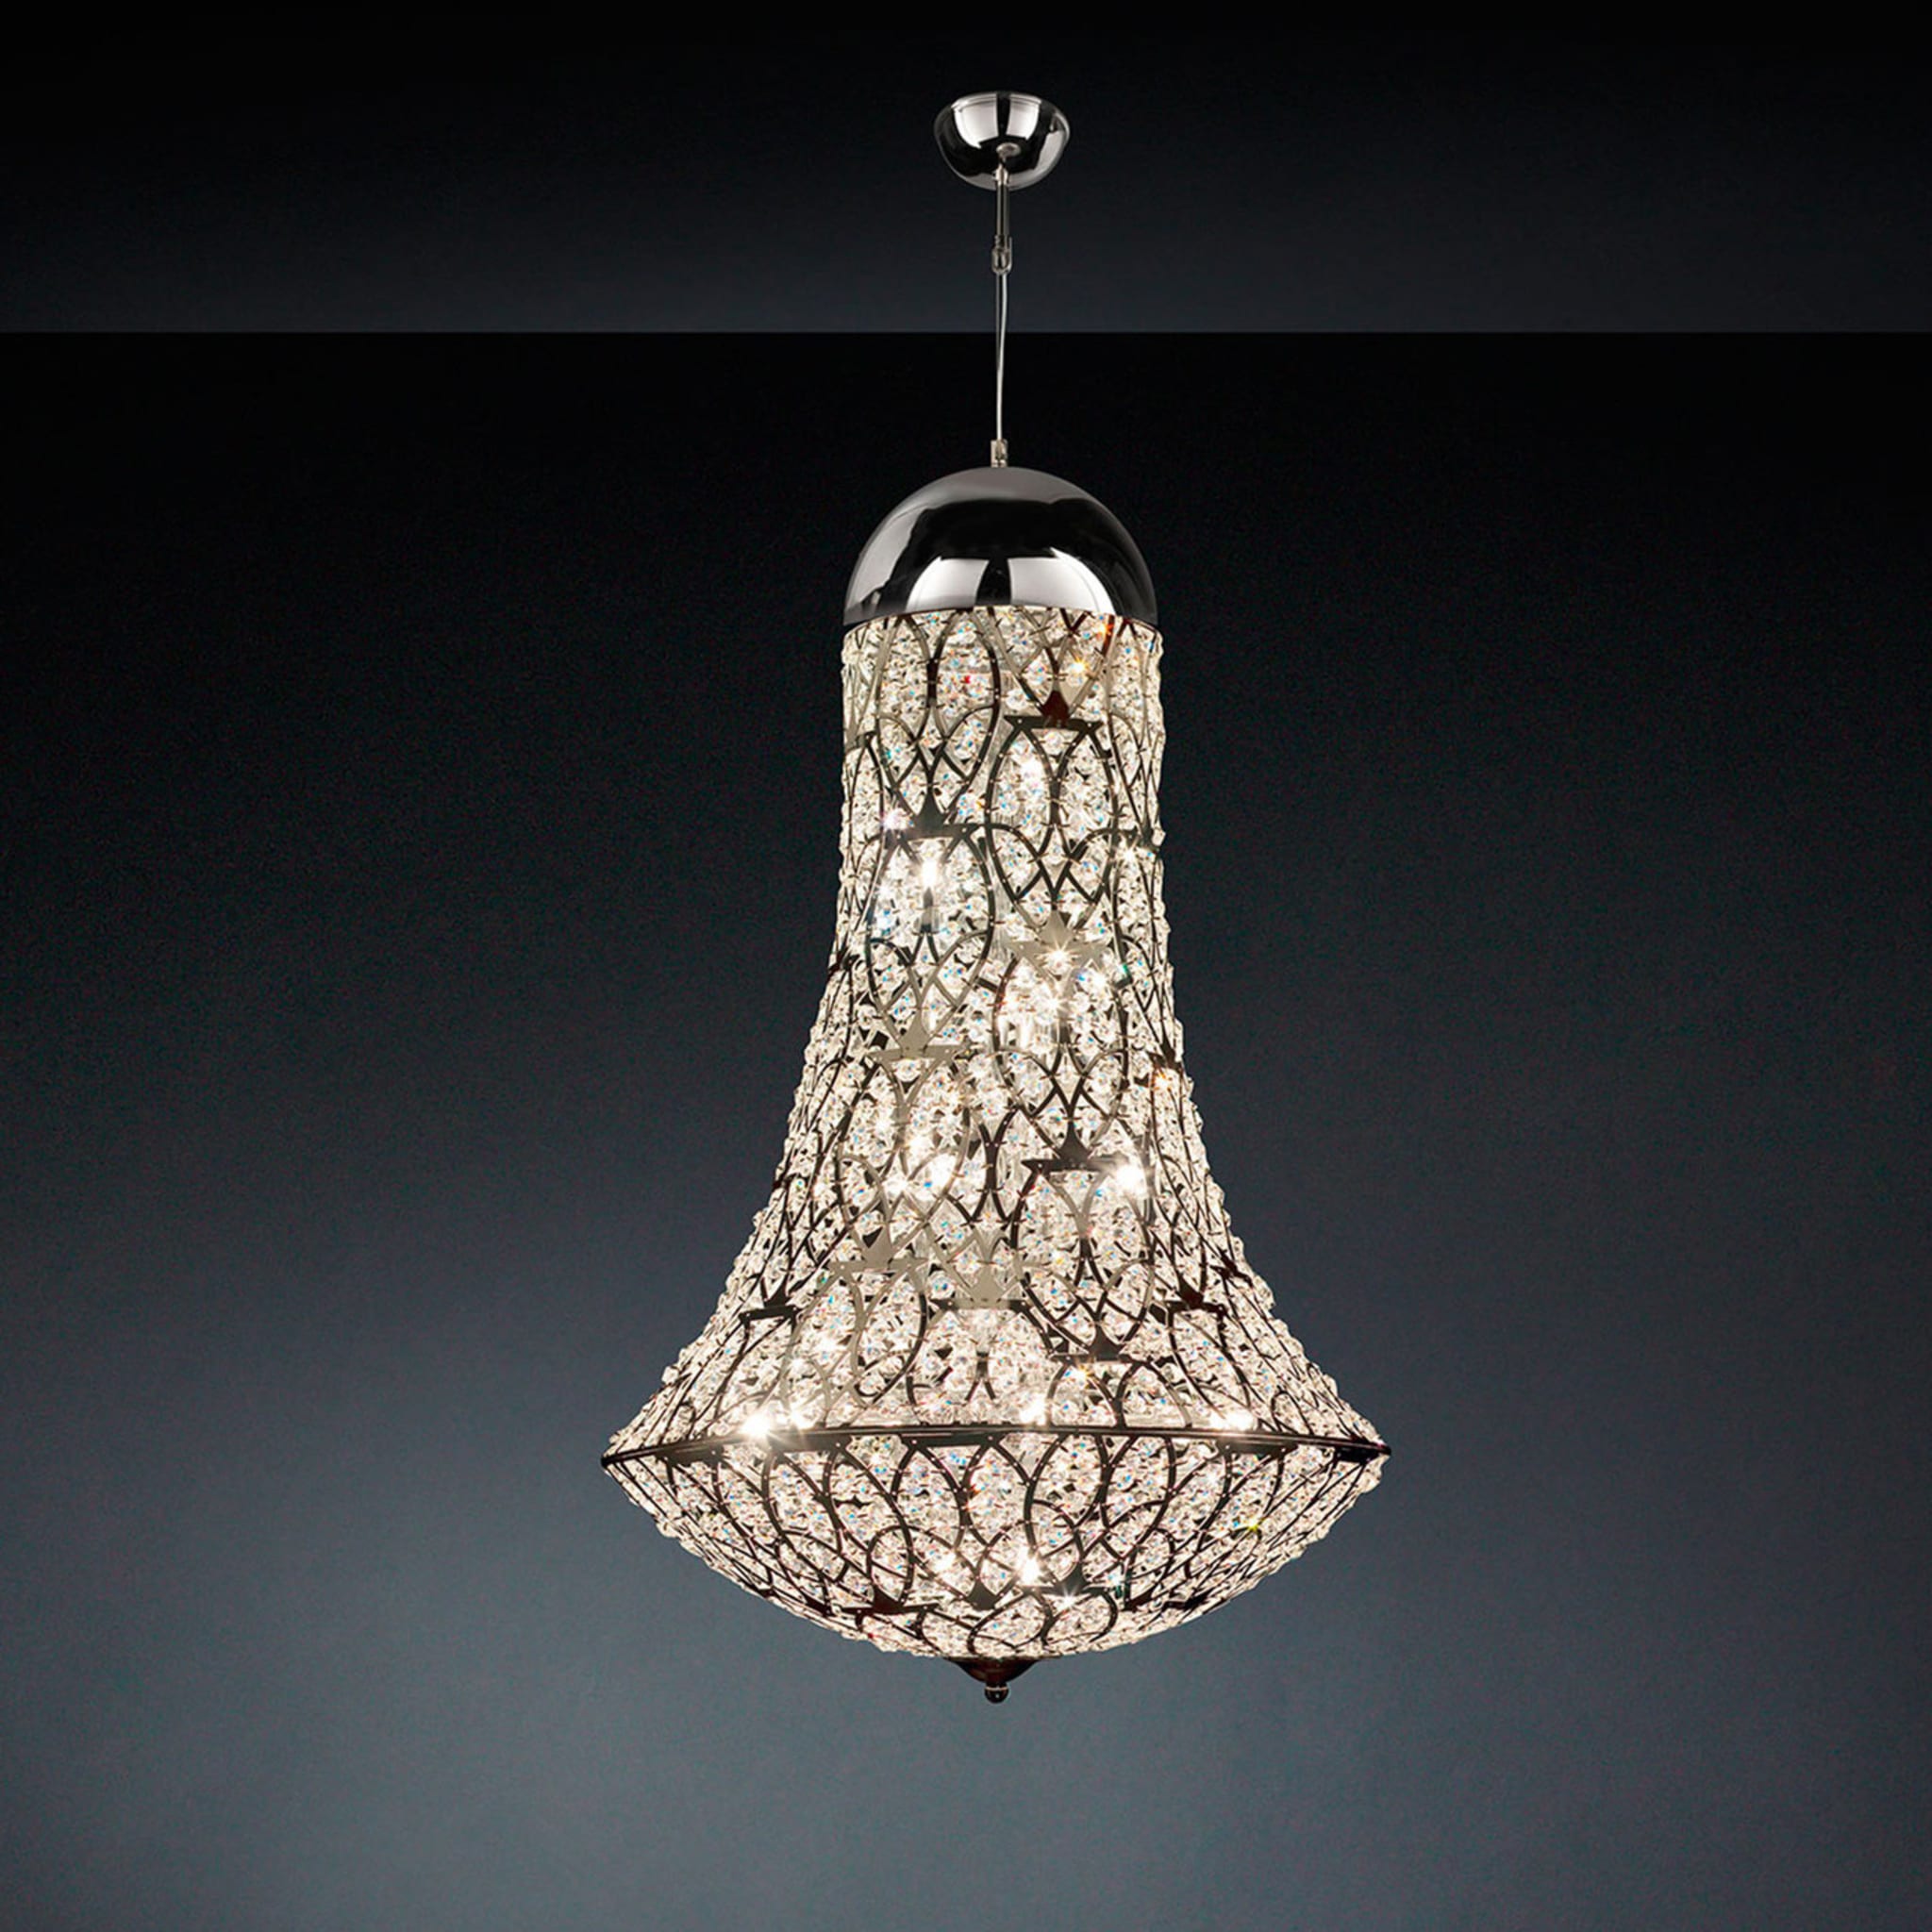 Arabesque Exclamation Small Pendant Lamp - Alternative view 2